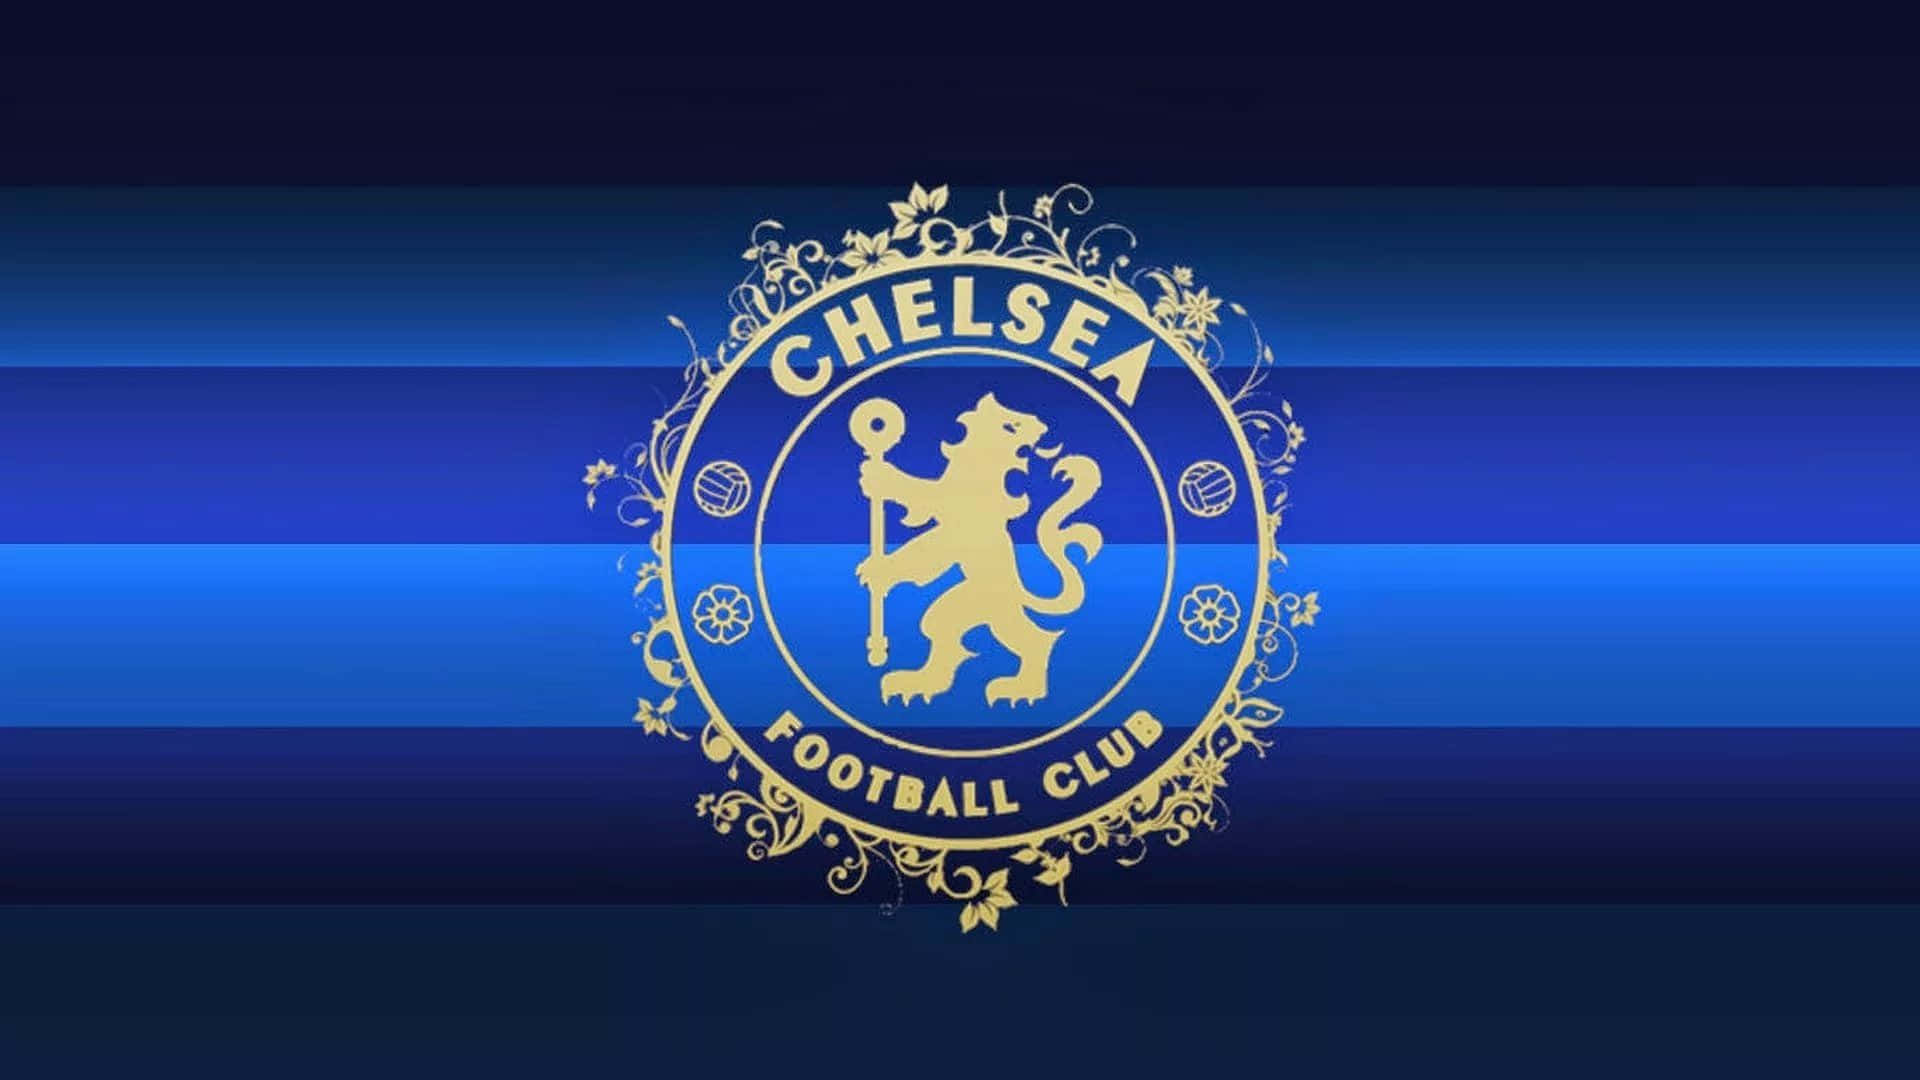 Blue is the Color - Fans of the Chelsea Football Club